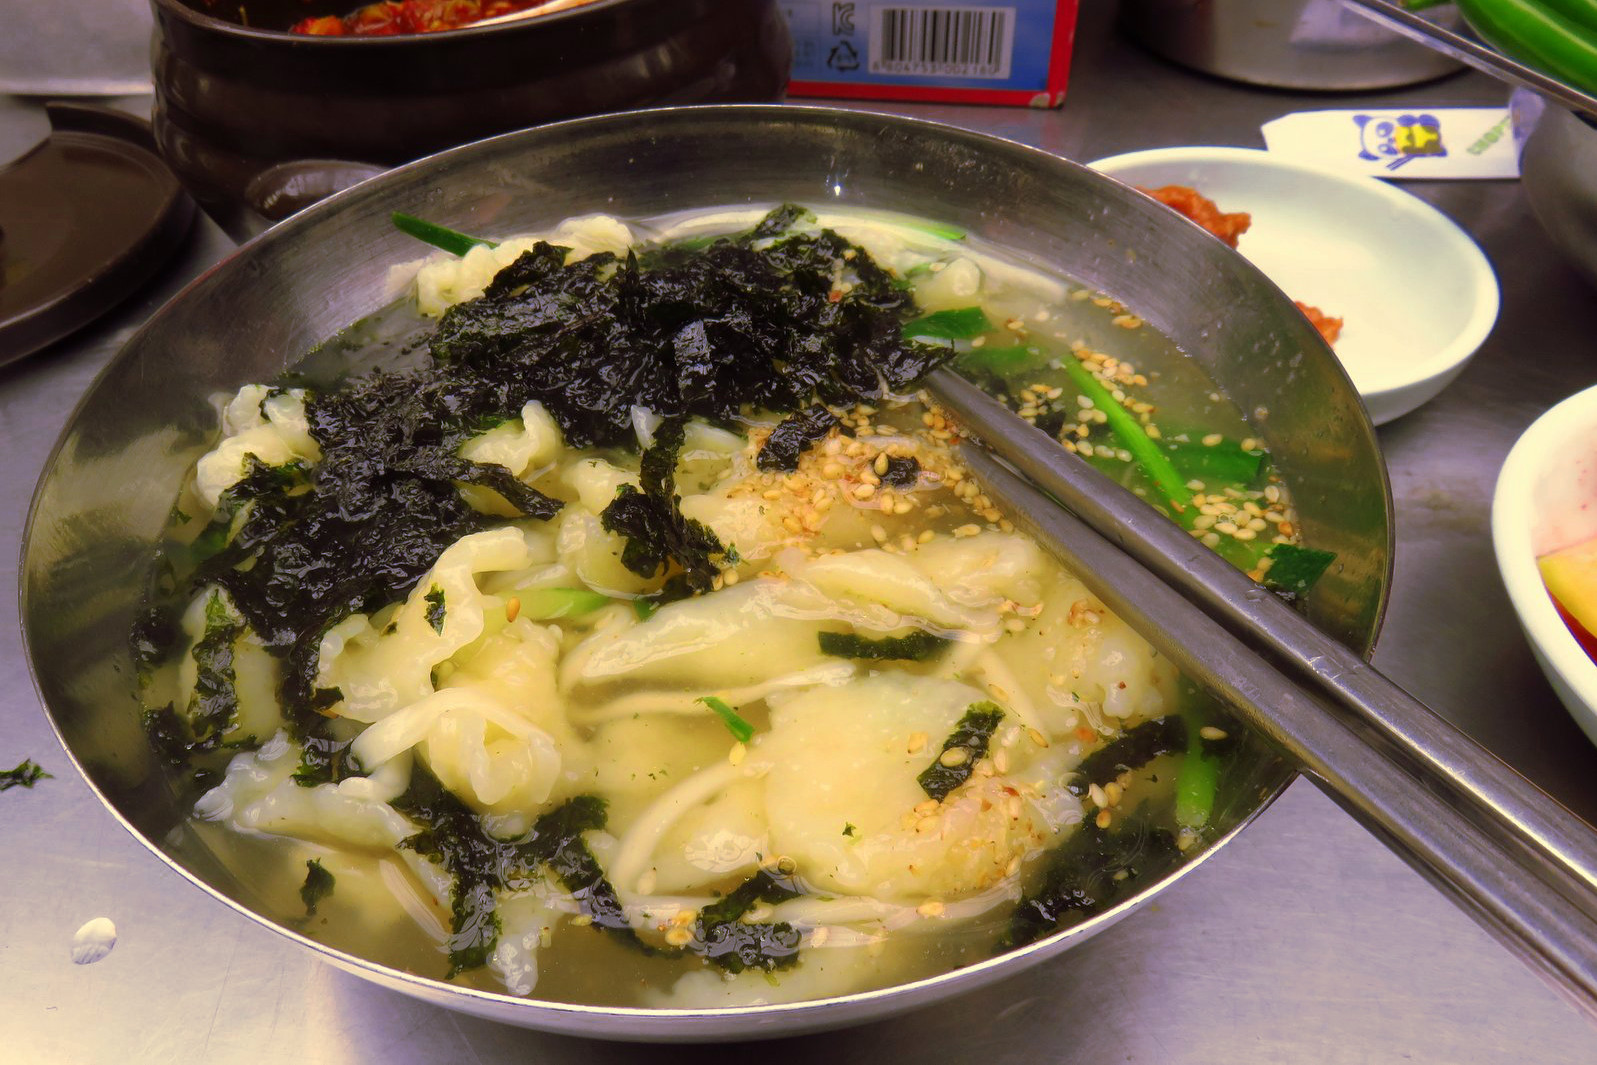 Sujebi are hand-torn noodles served in soup broth. Image by Phillip Tang / Lonely Planet